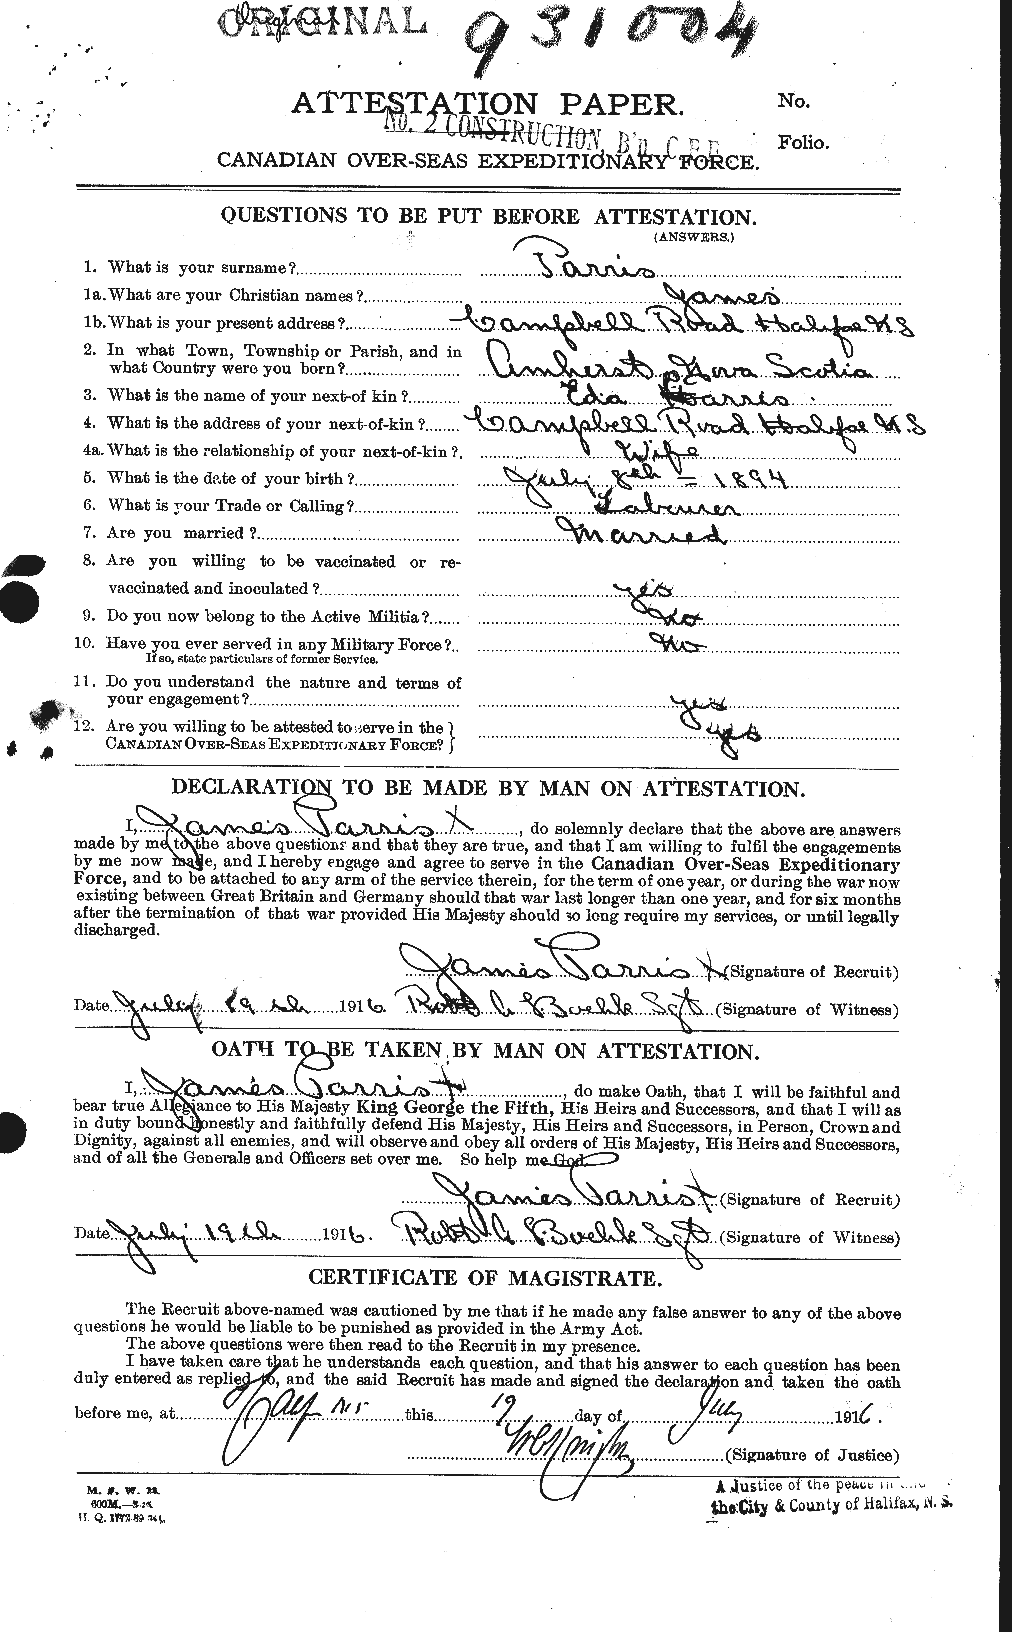 Personnel Records of the First World War - CEF 566508a